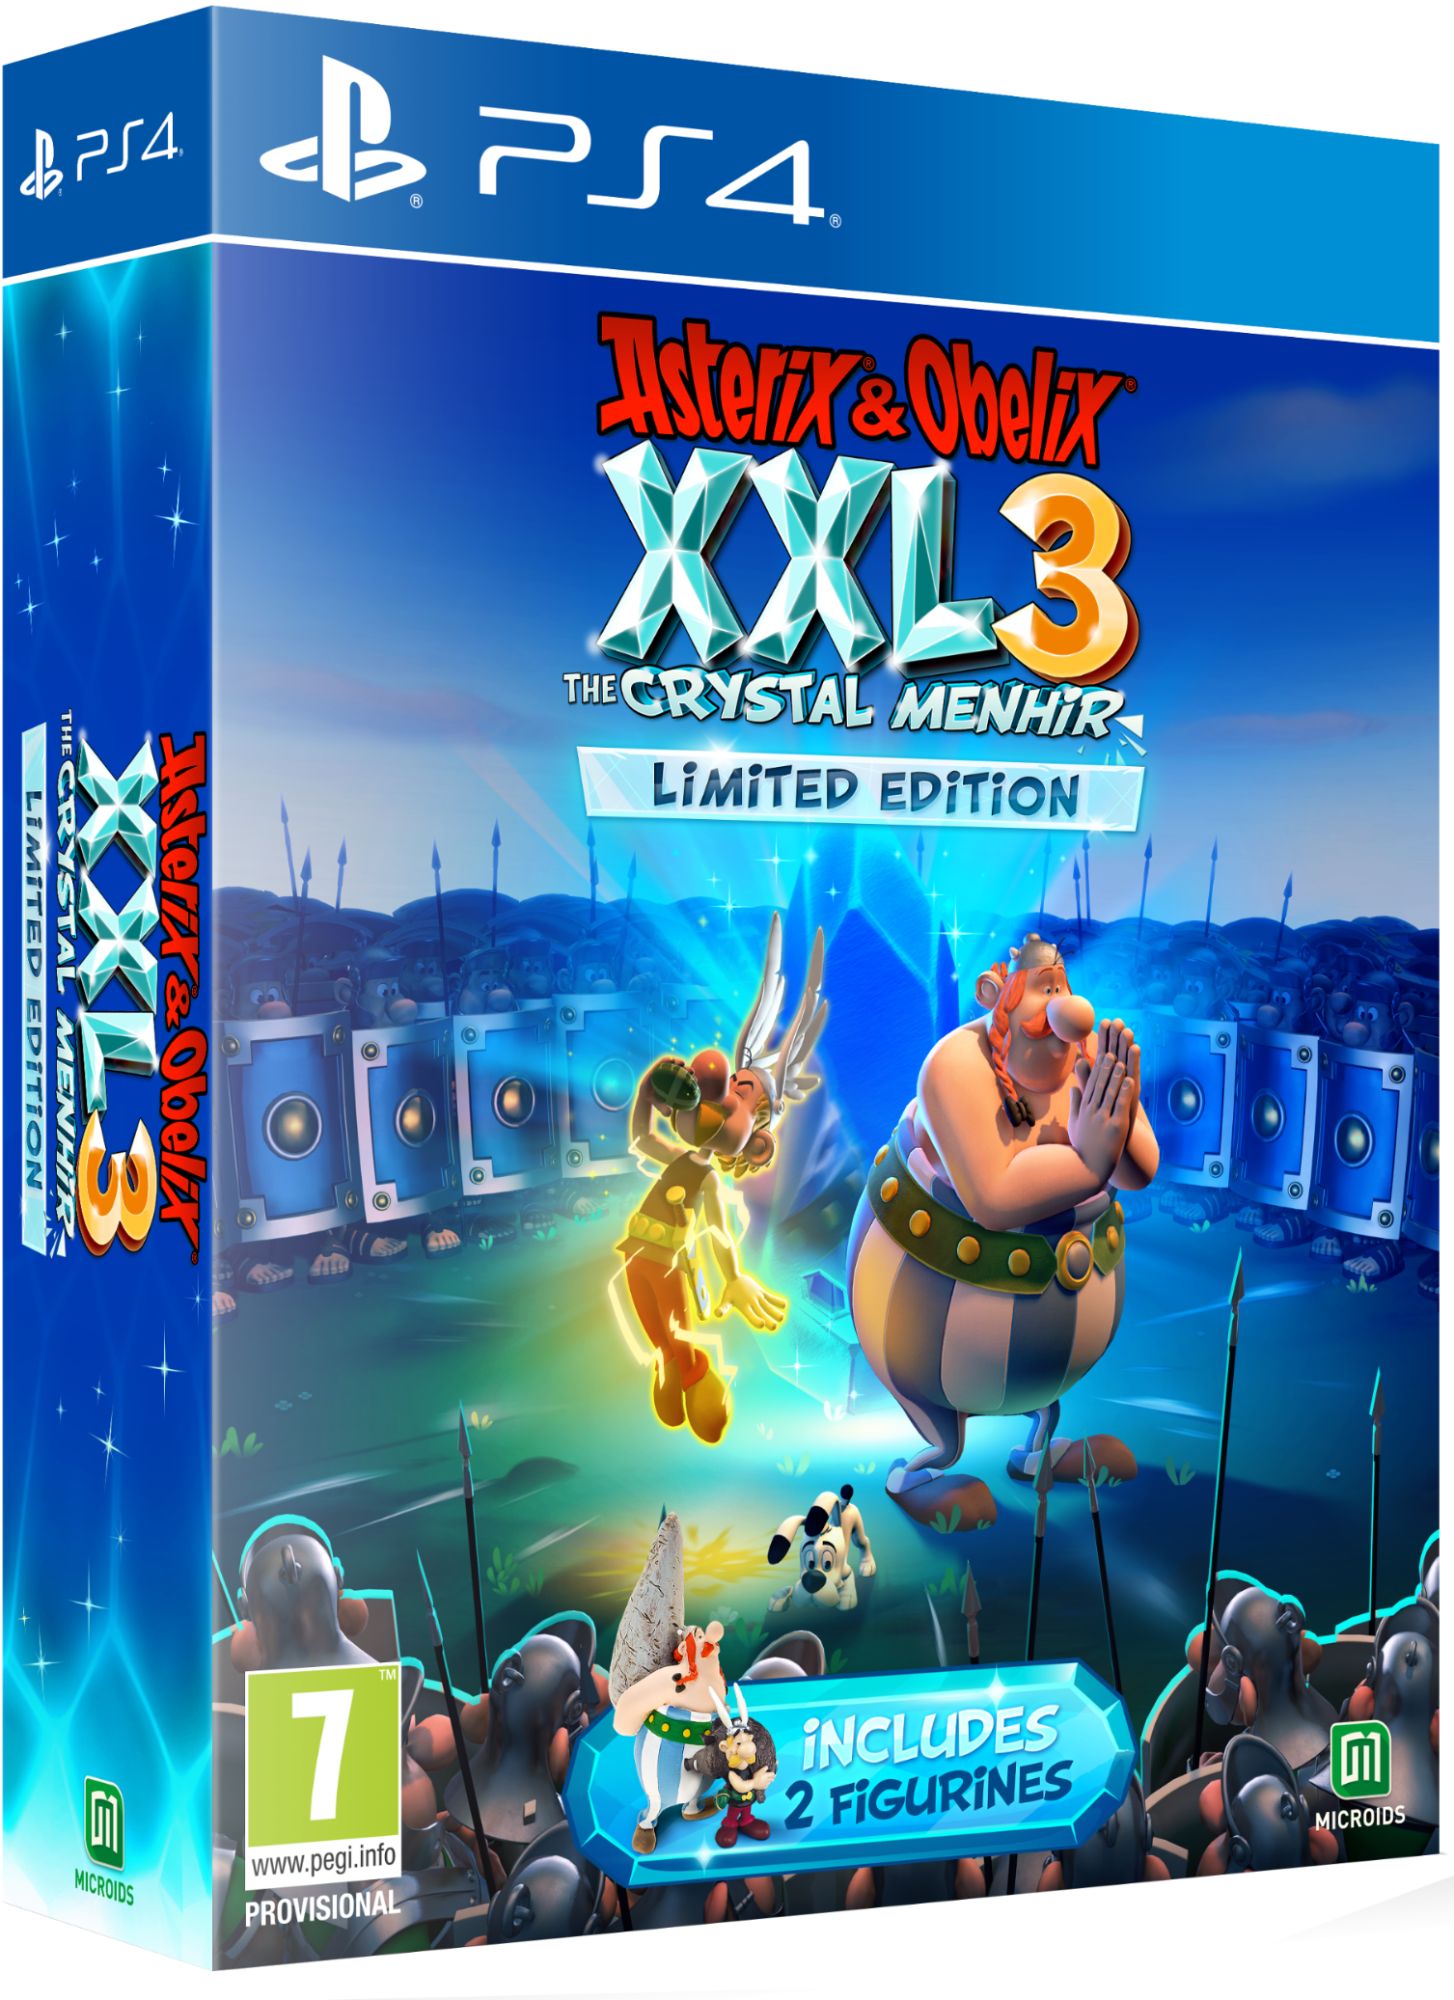 Asterix & Obelix XXL 3: The Crystal Menhir - Limited Edition